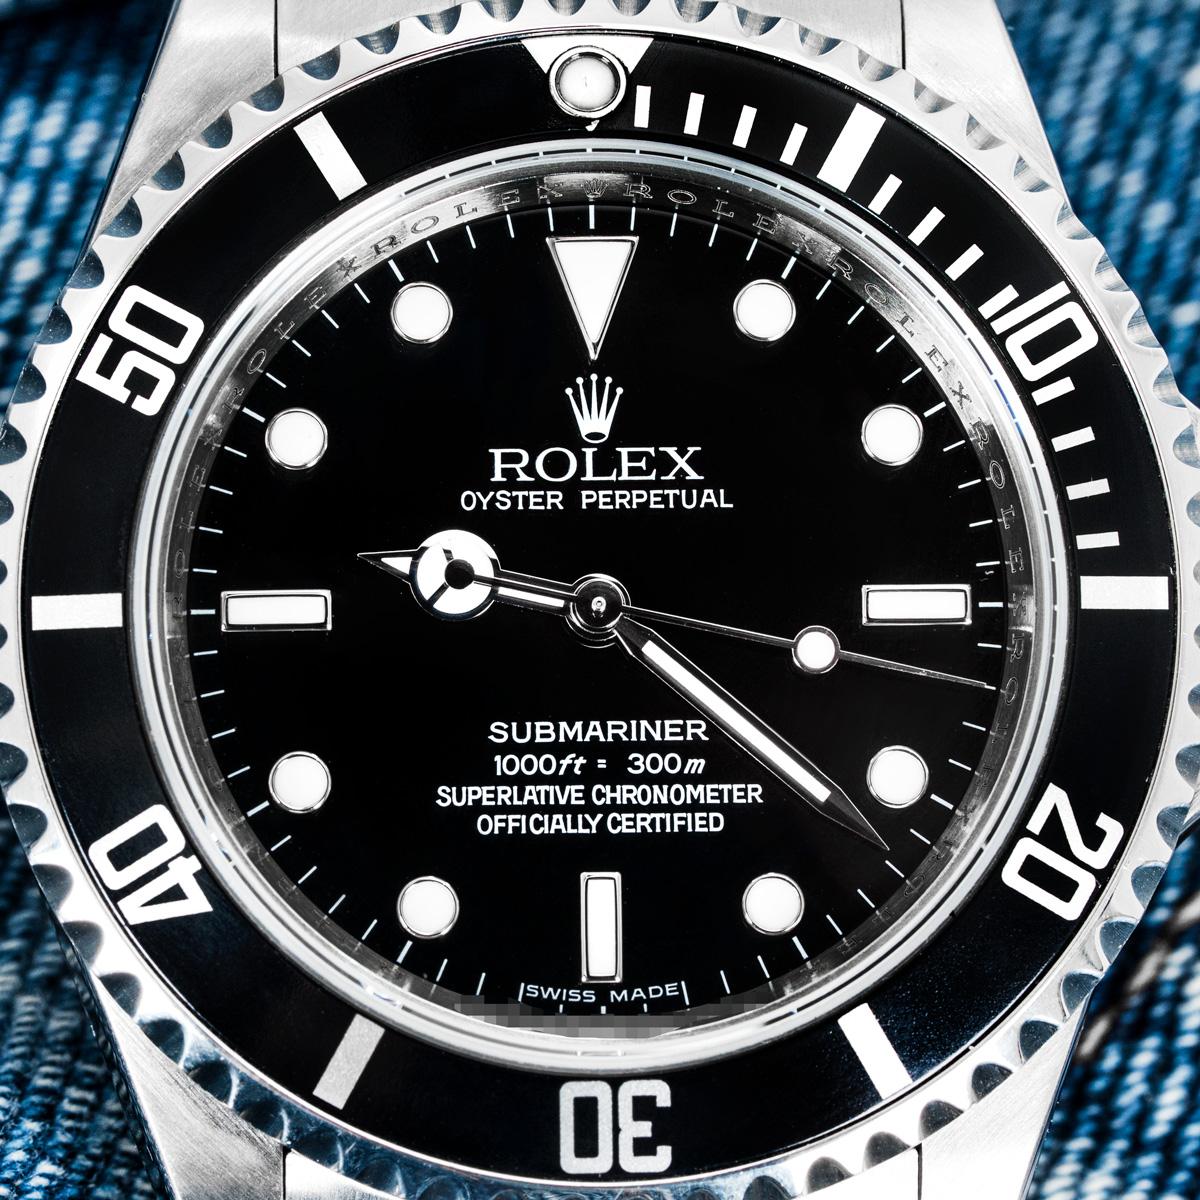 A Oystersteel Submariner Non-Date by Rolex. Featuring a black dial with a distinctive 4 liner text and a uni-directional rotatable bezel with a black bezel insert and 60 minute graduations. The Oyster bracelet comes with a folding Oysterlock clasp.